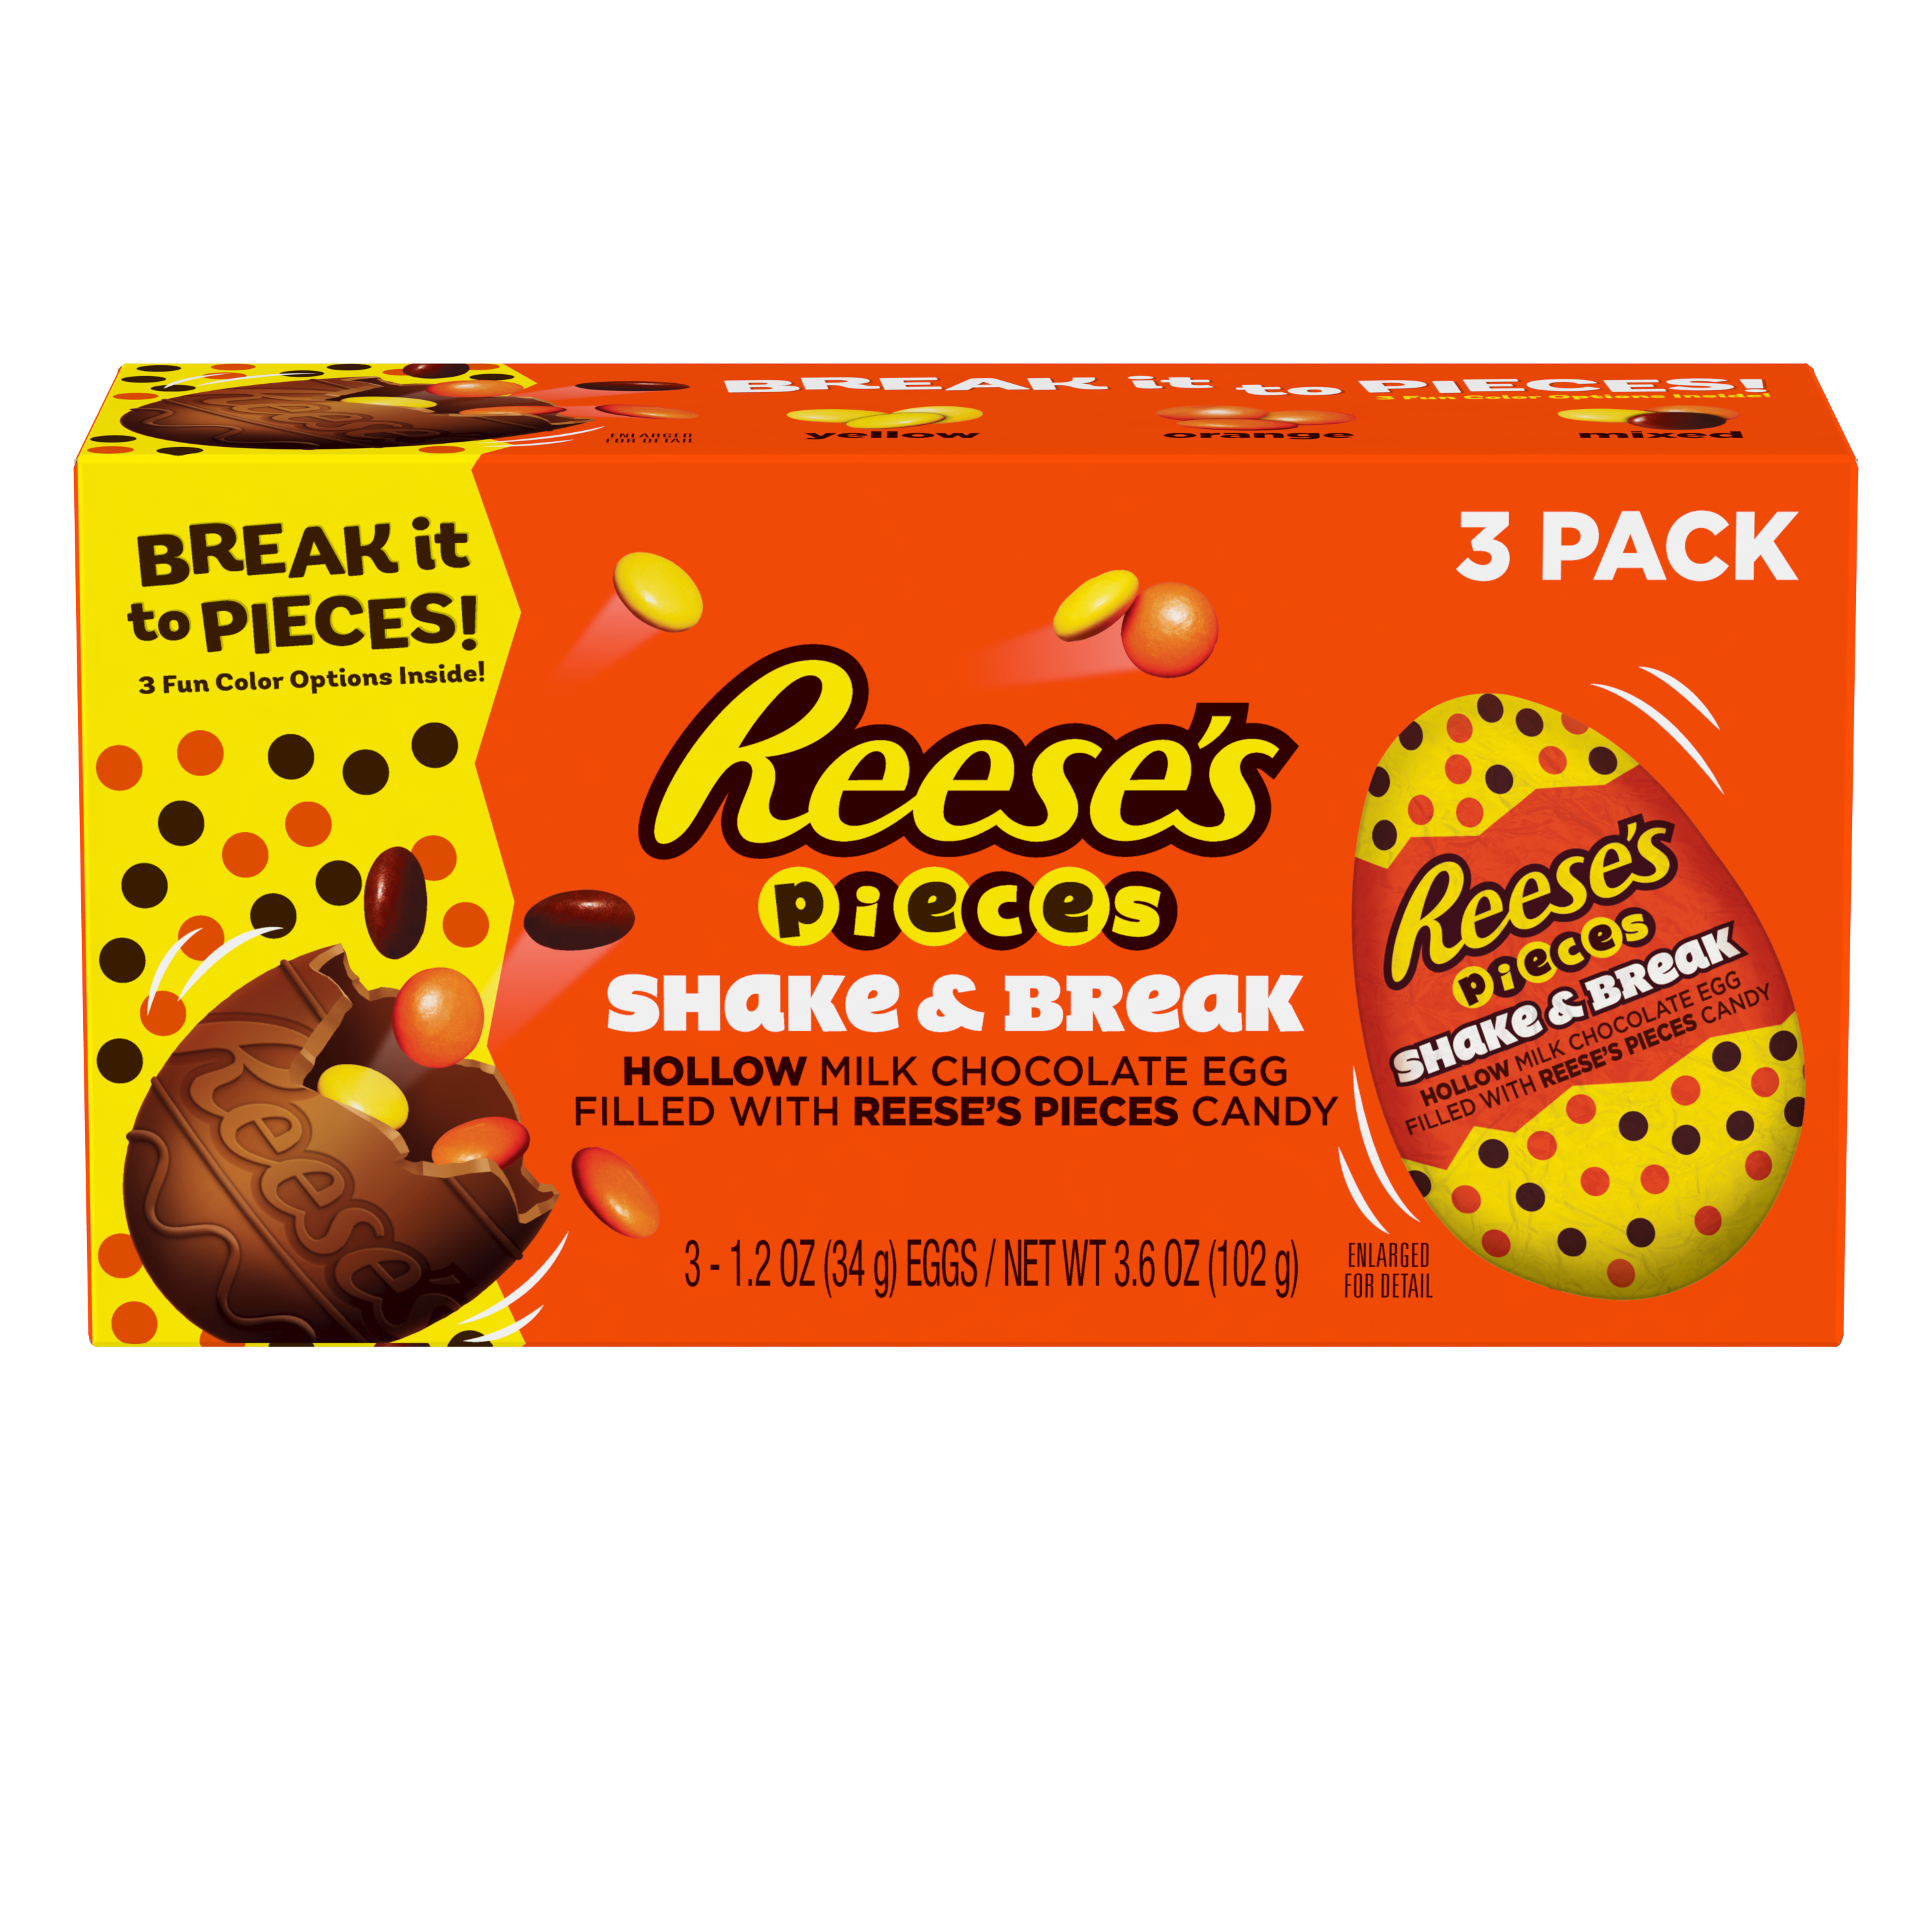 REESE'S PIECES SHAKE & BREAK Milk Chocolate Peanut Butter Eggs, 3.6 oz box, 3 pack - Front of Package